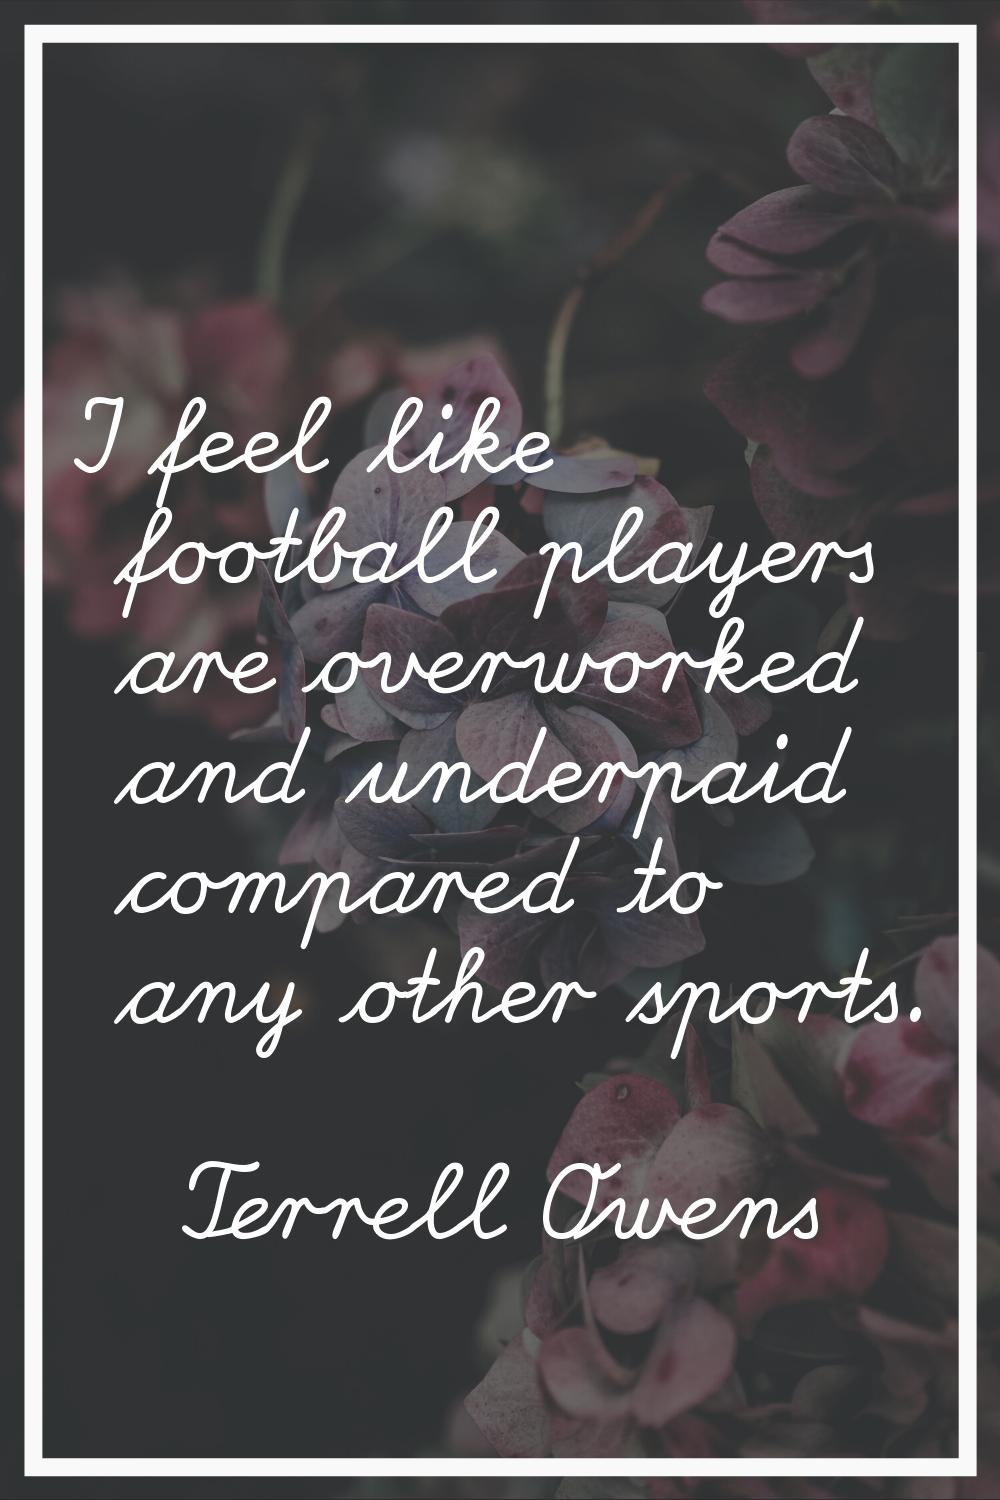 I feel like football players are overworked and underpaid compared to any other sports.